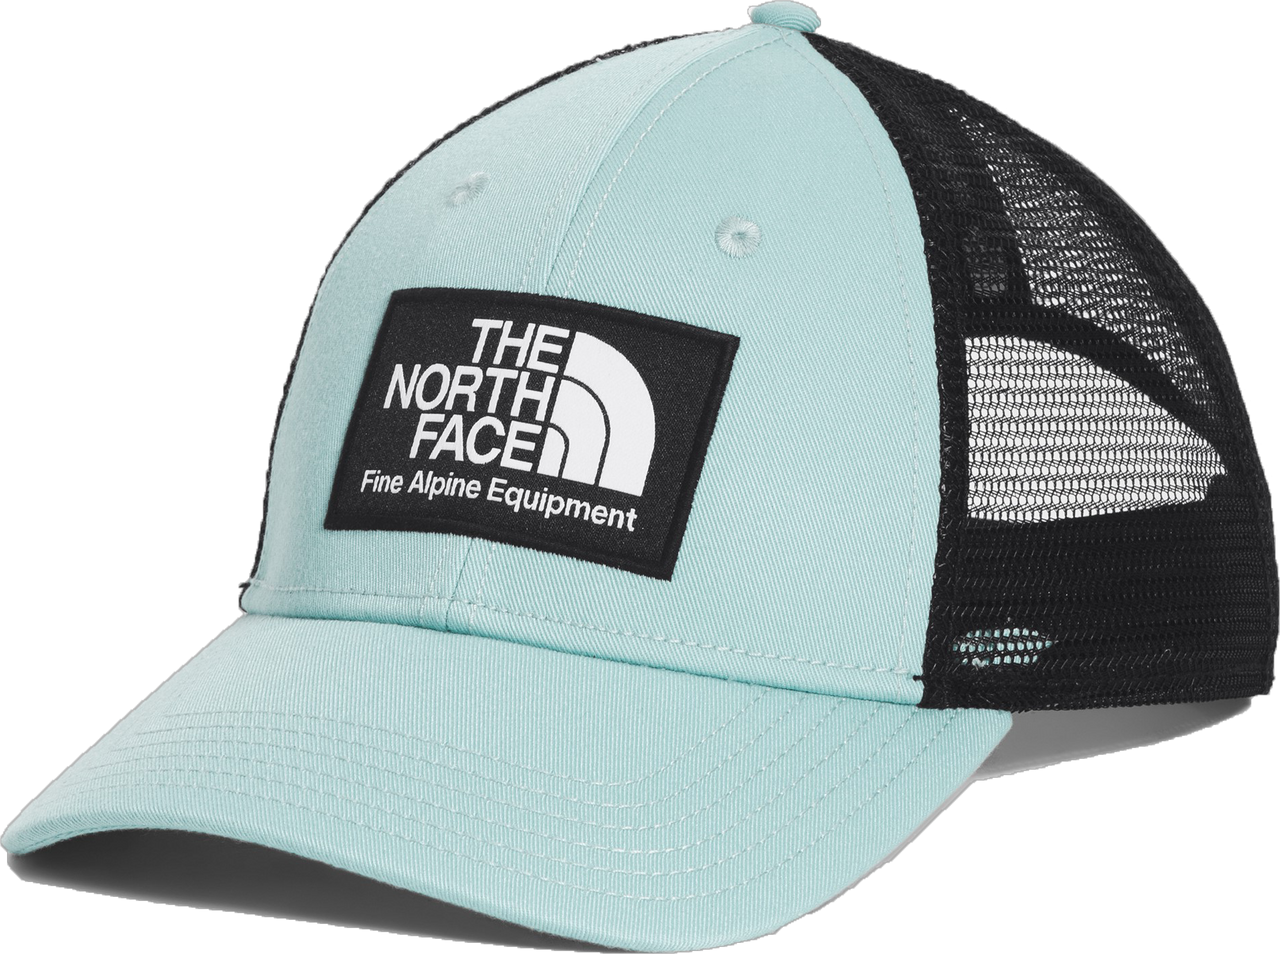 The North Face Accessories Mudder Trucker Hat Skylight Blue